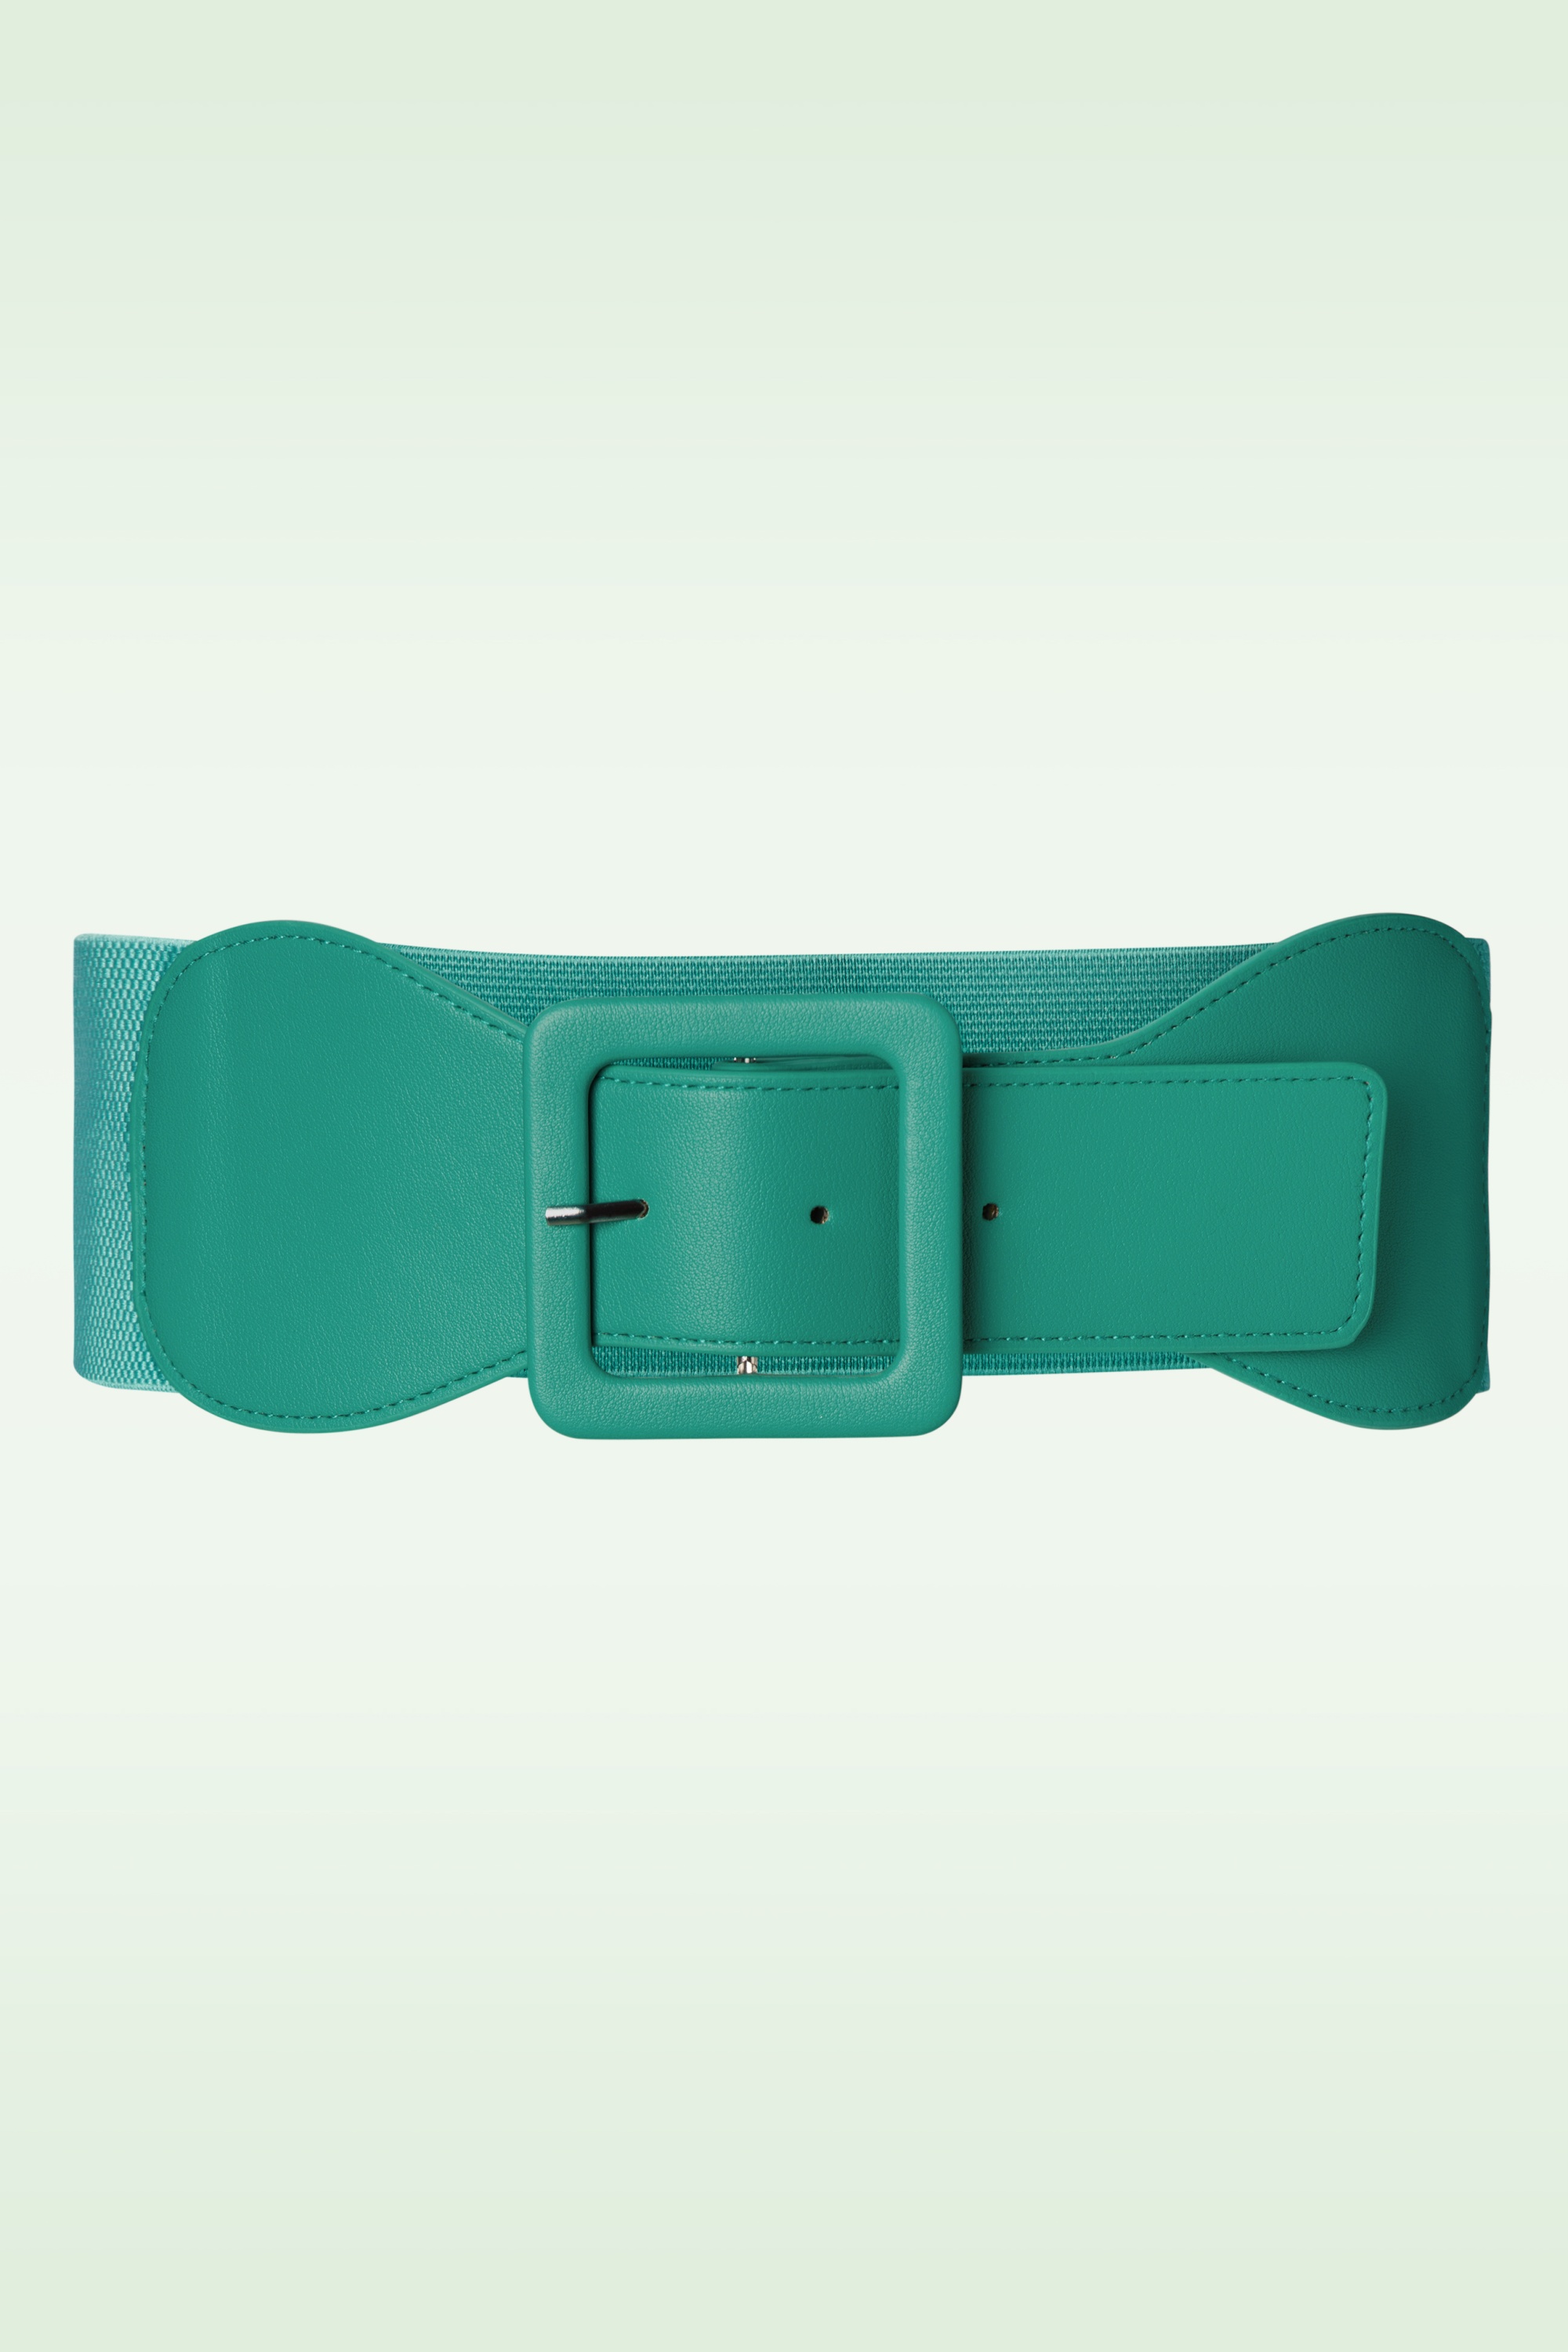 Banned Retro - Ladies Day Out riem met vierkante gesp in turquoise